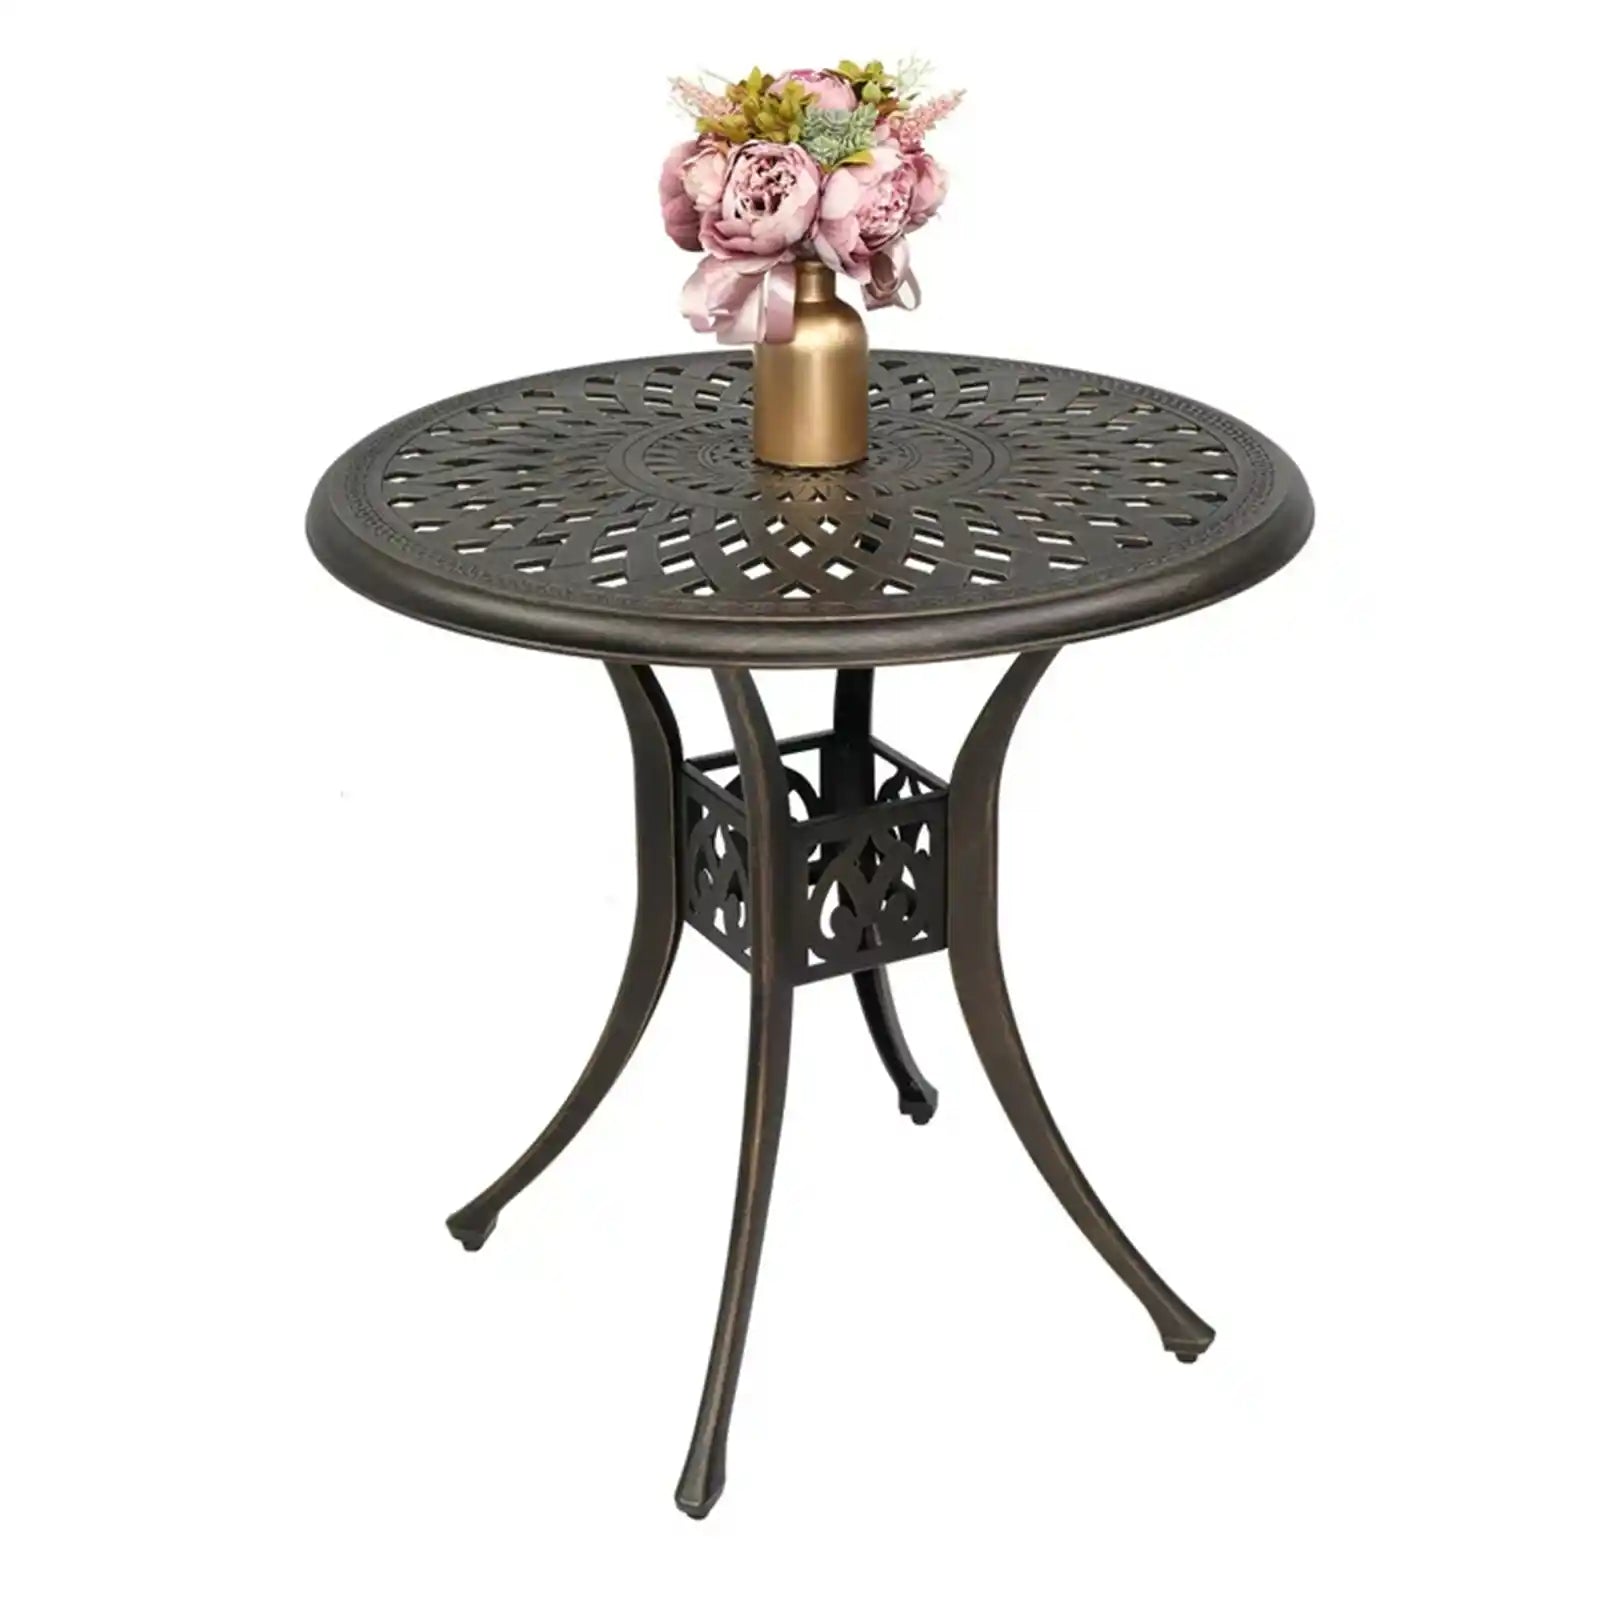 Cast Aluminum Patio Table with Umbrella Hole, Round Outdoor Bistro Table for Backyard